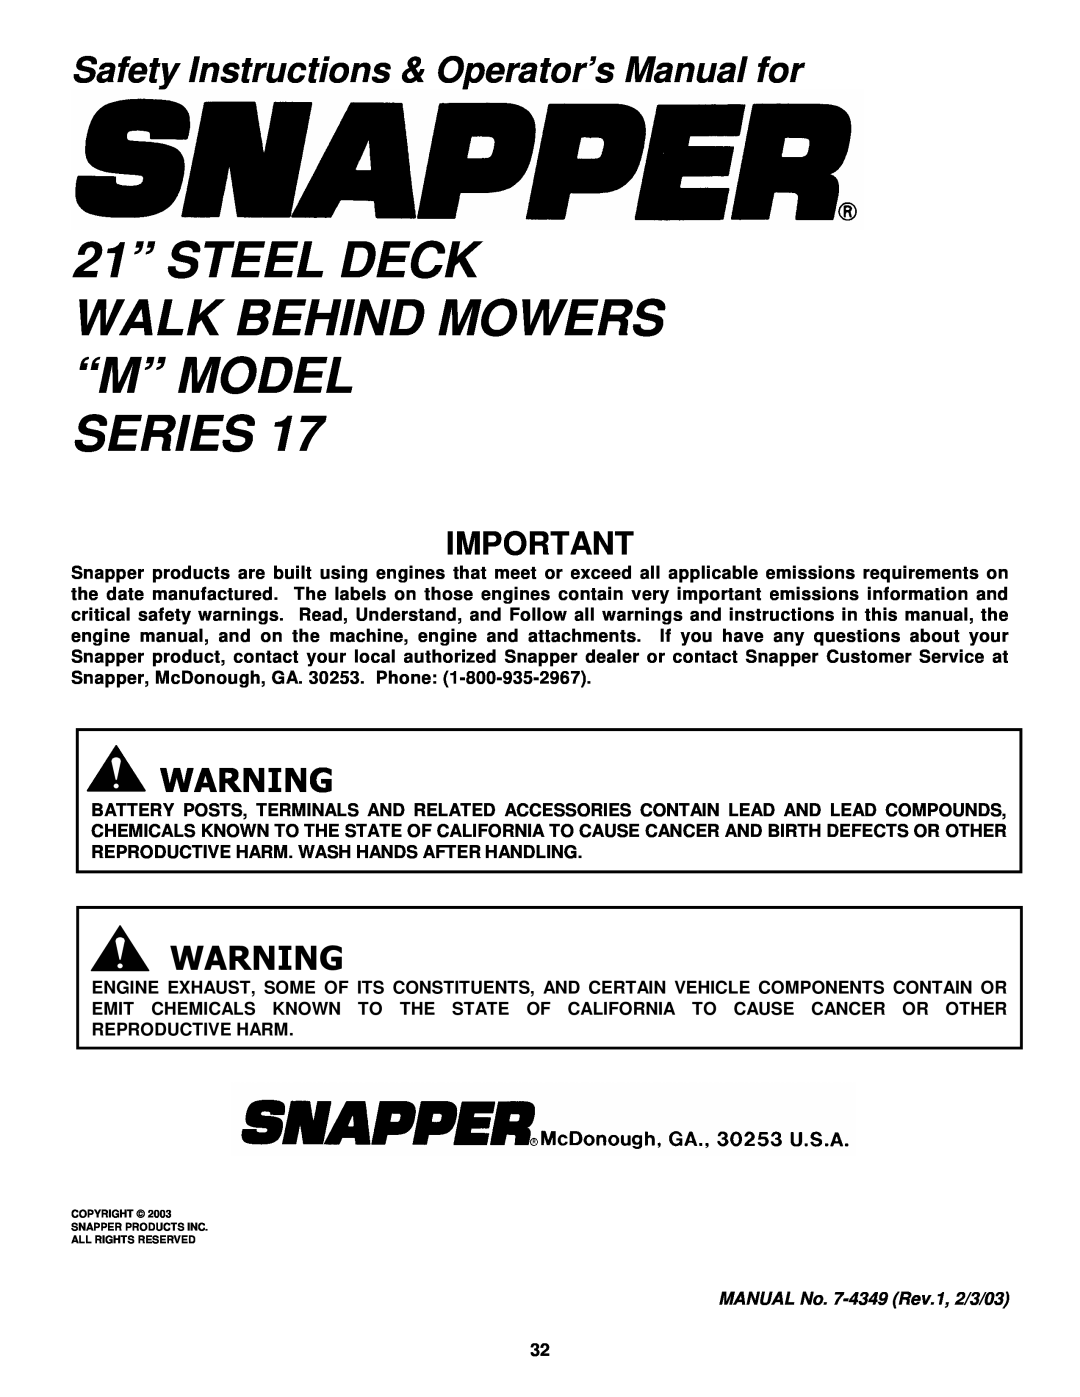 Snapper MR216017B 21” STEEL DECK WALK BEHIND MOWERS “M” MODEL SERIES, Safety Instructions & Operator’s Manual for 